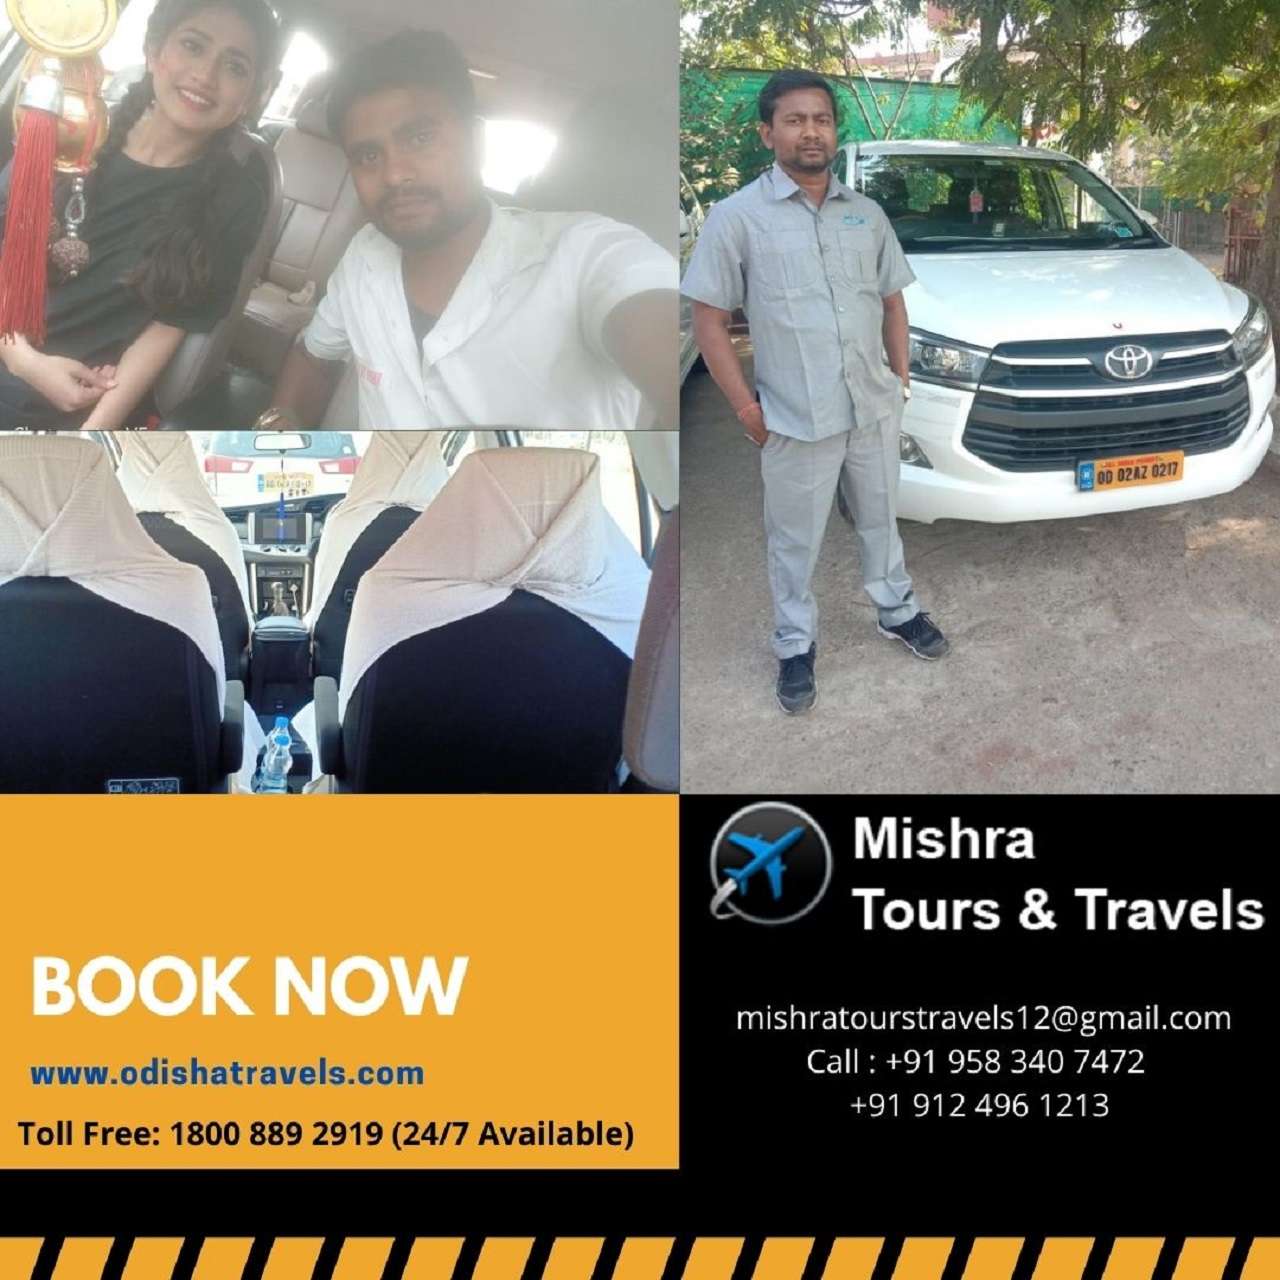 Looking for the best travel agents in Odisha?